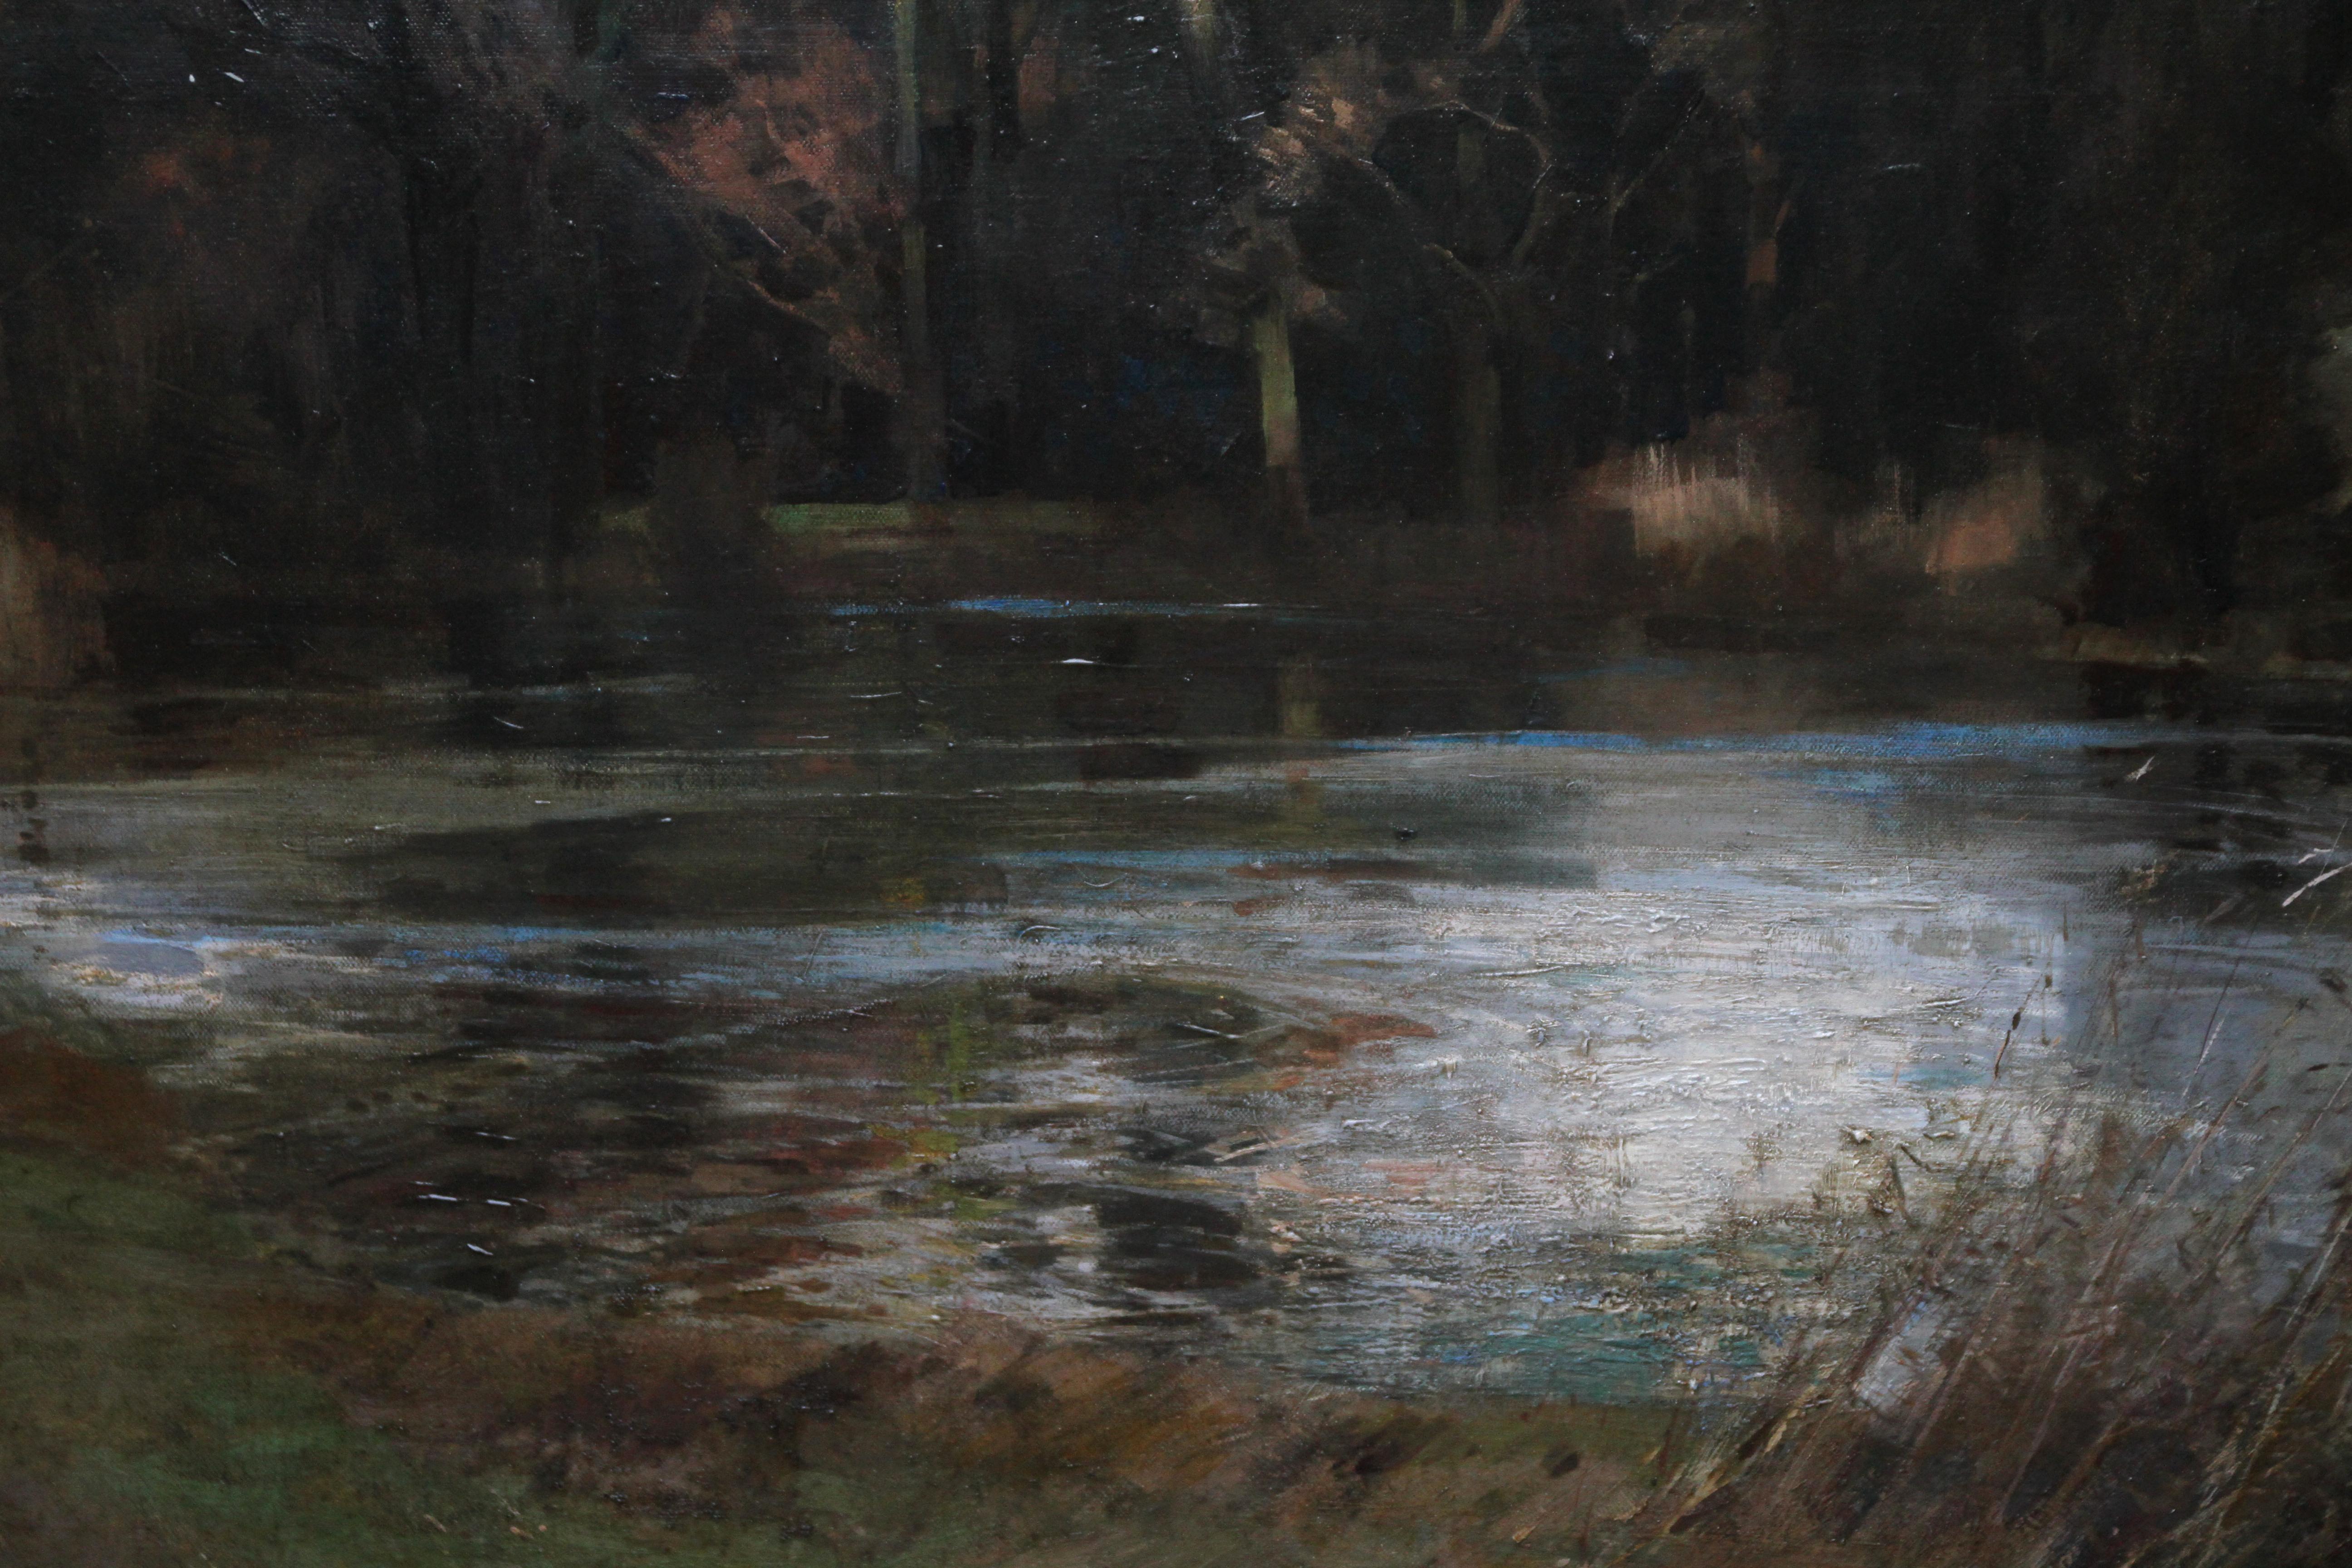 This superb large oil on canvas painting of a river landscape is by British artist William Thomas Wood. Painted in 1950, the river is the Arun near Arundel in Sussex. Wood beautifully catches the light and shadow on the landscape and reflections in